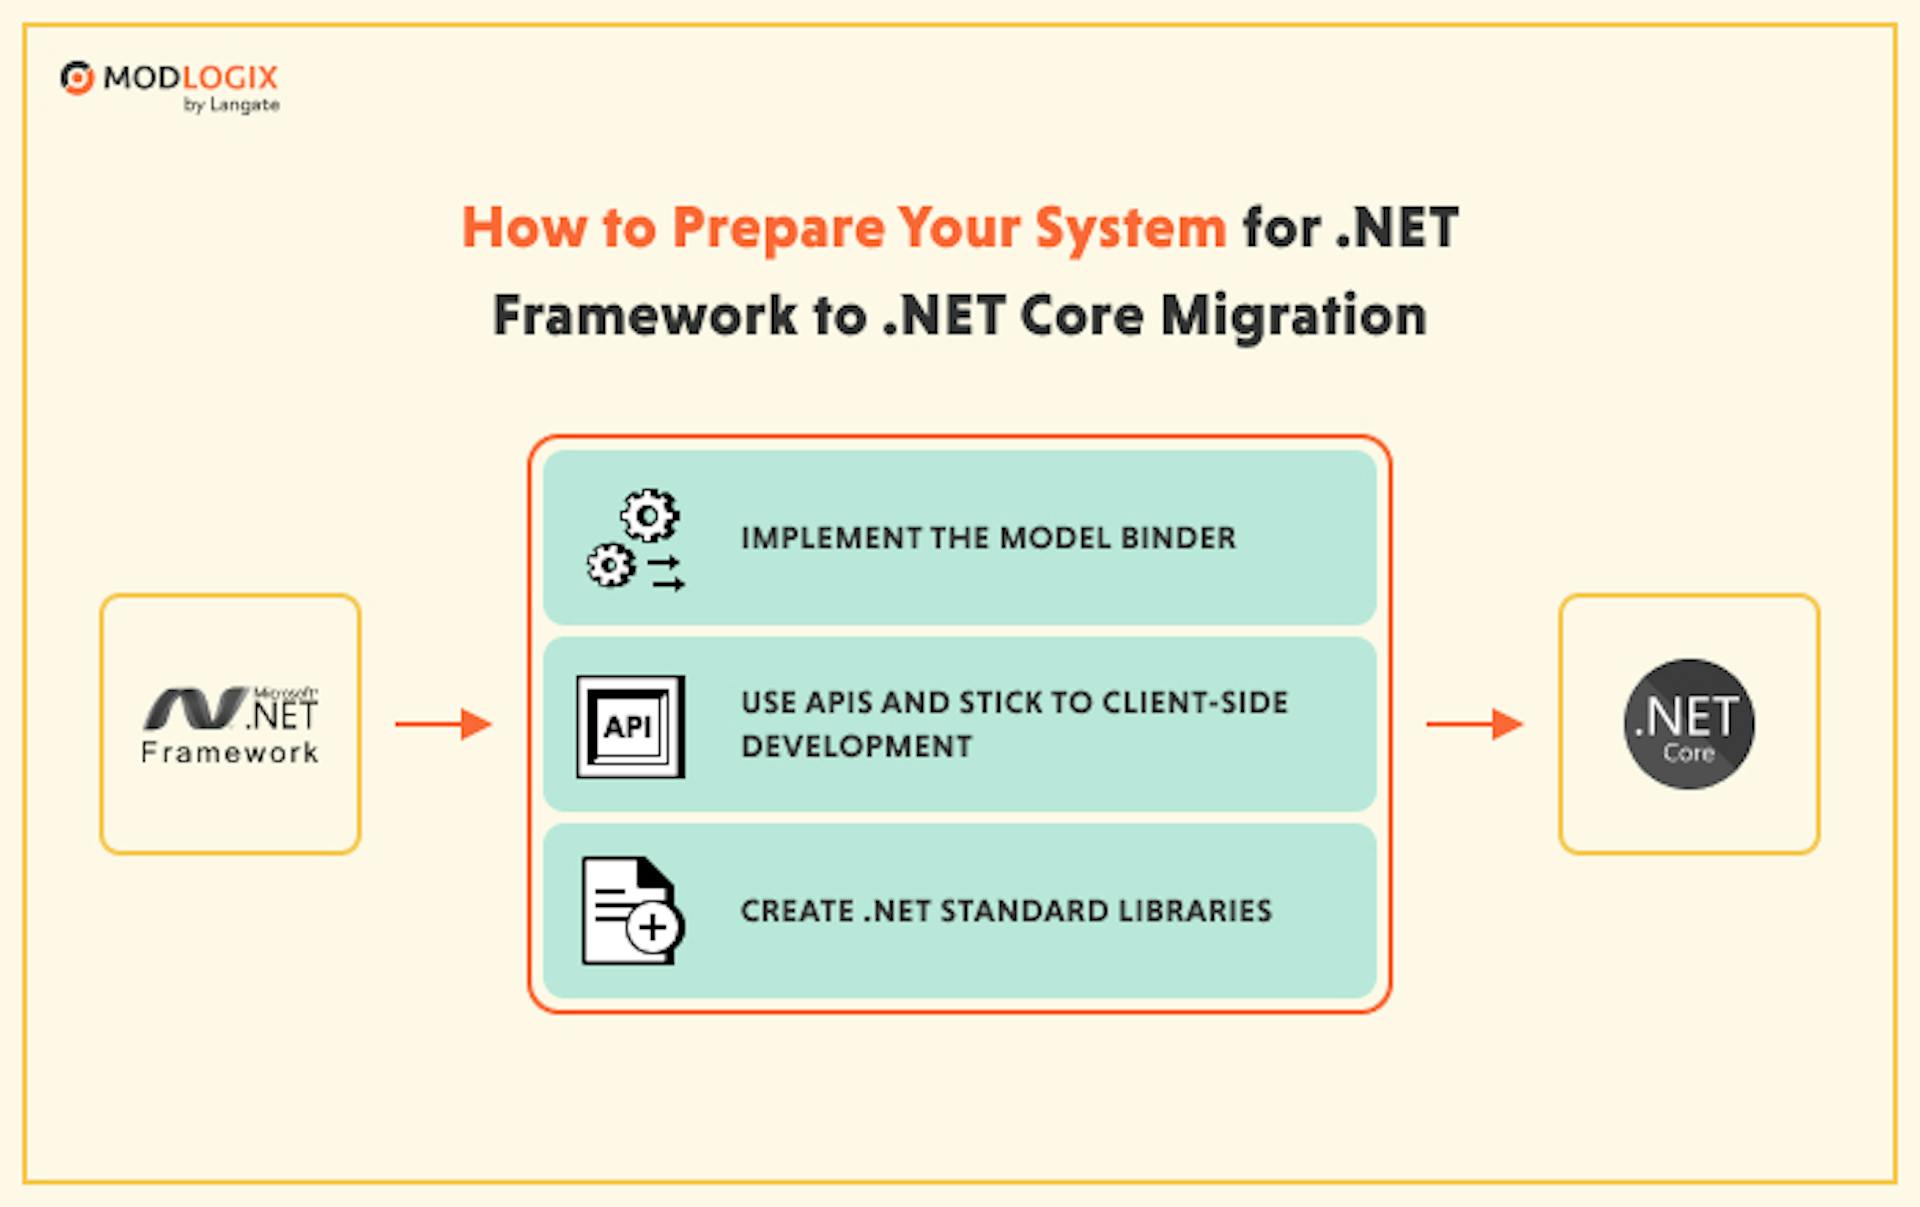 How to prepare your legacy system for .NET Framework to .NET Core migration 